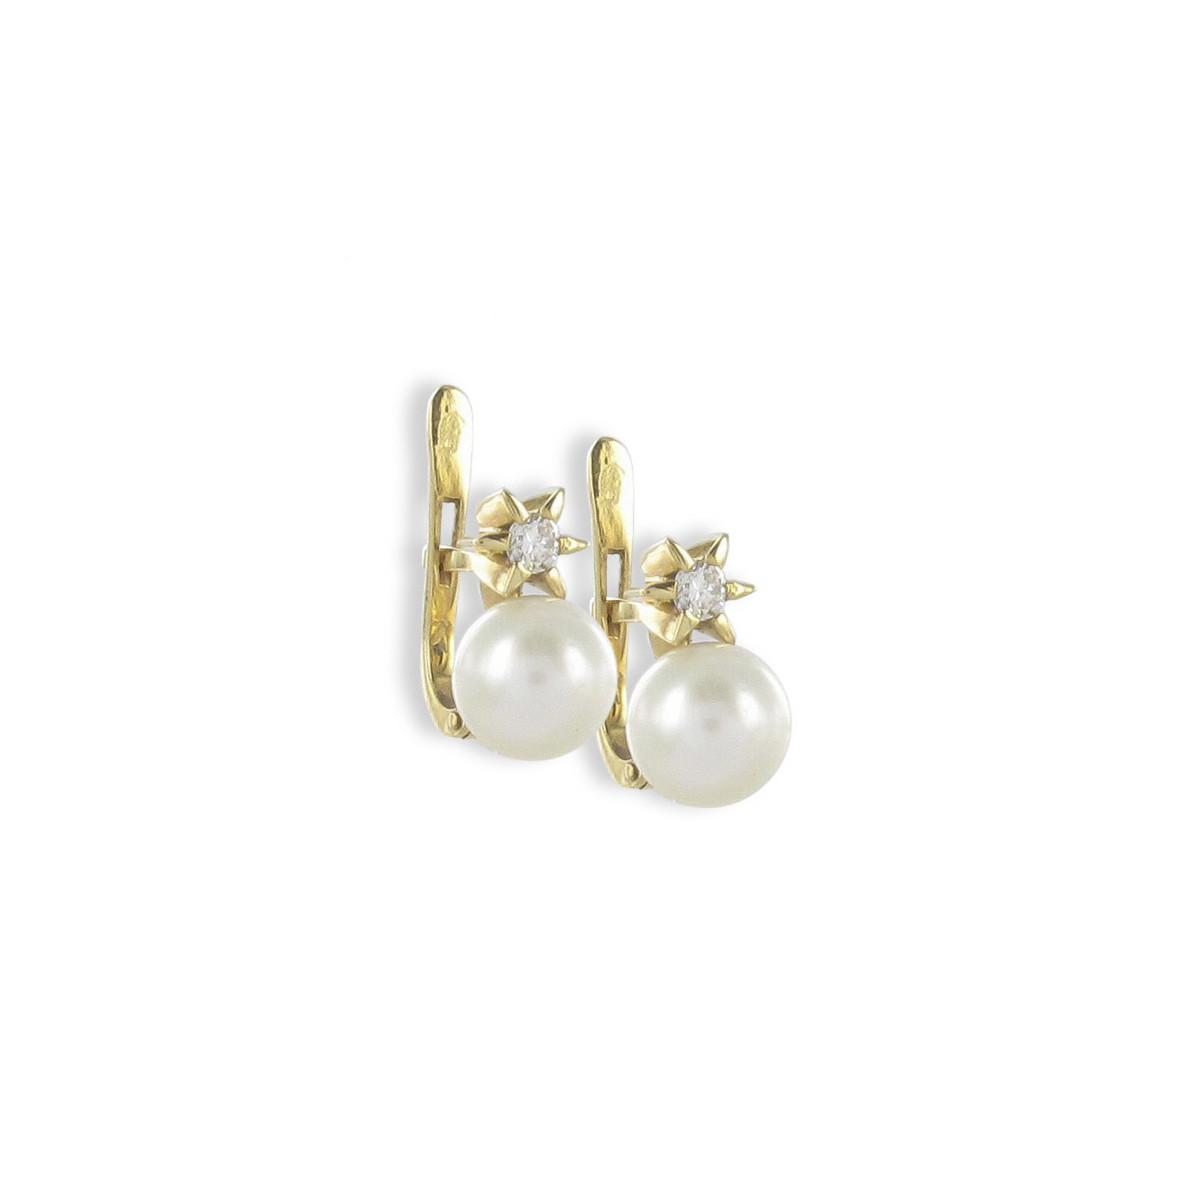 YOU AND ME YELLOW GOLD EARRINGS